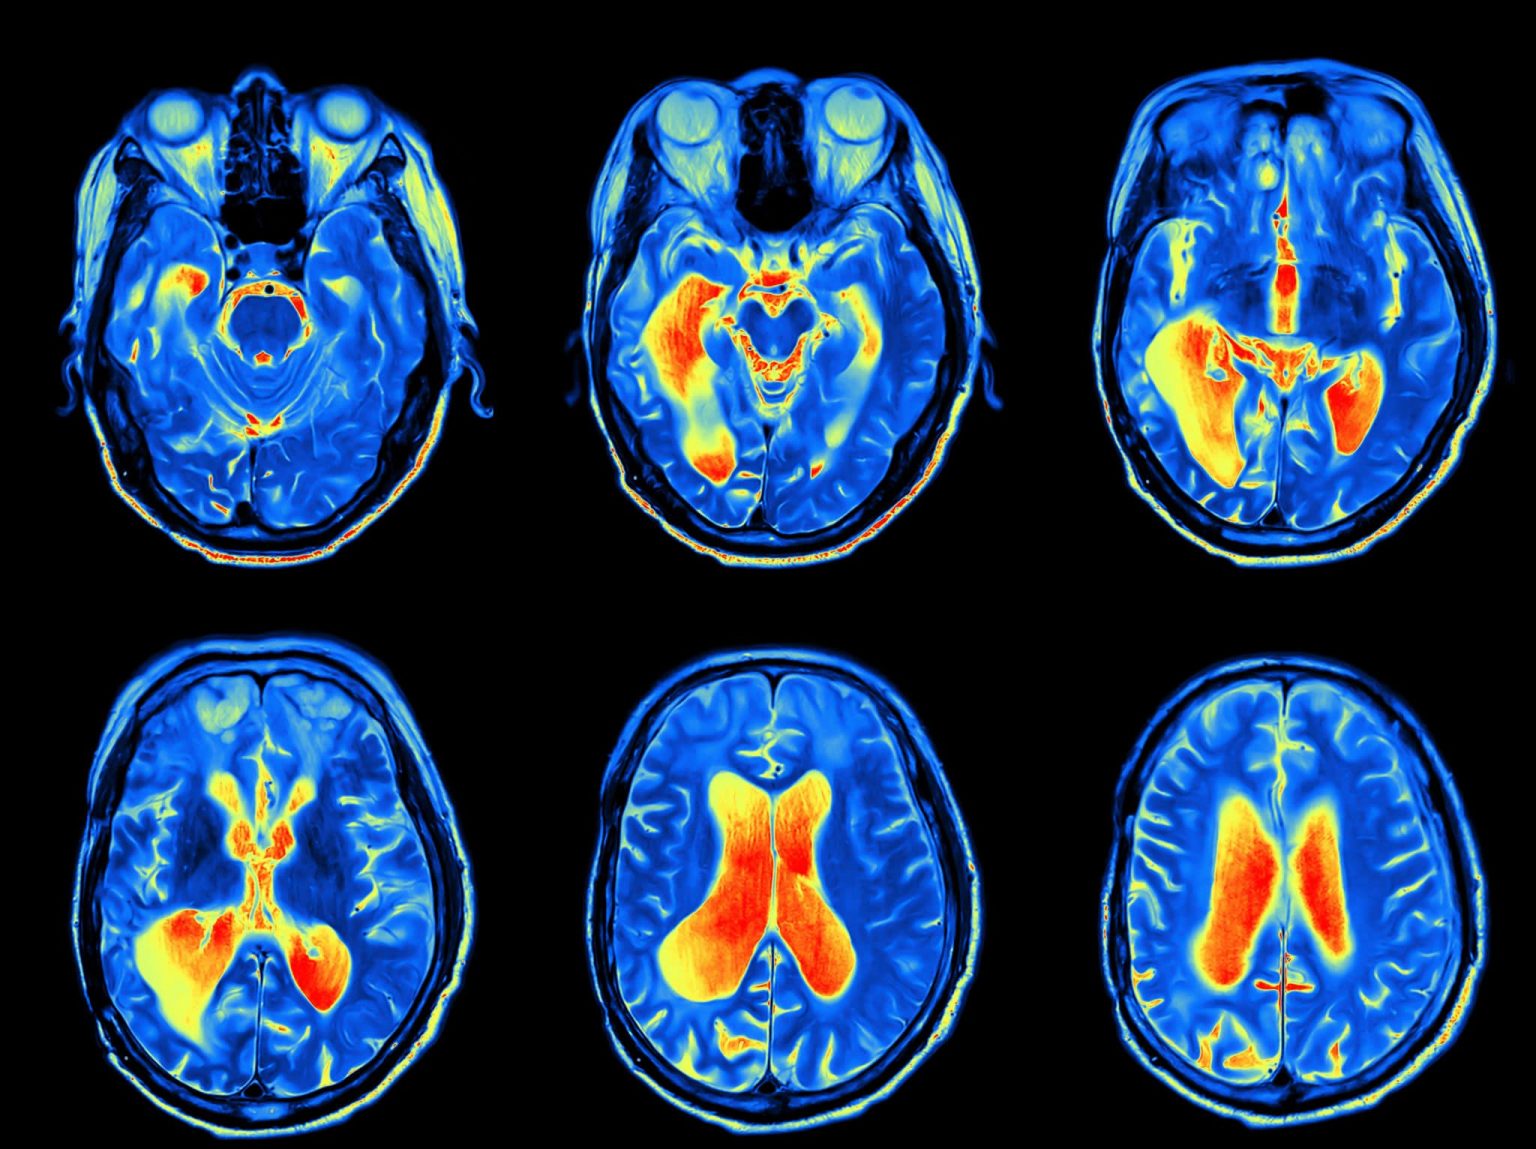 A series of MRI images of the brain during a skull base tumor exam.